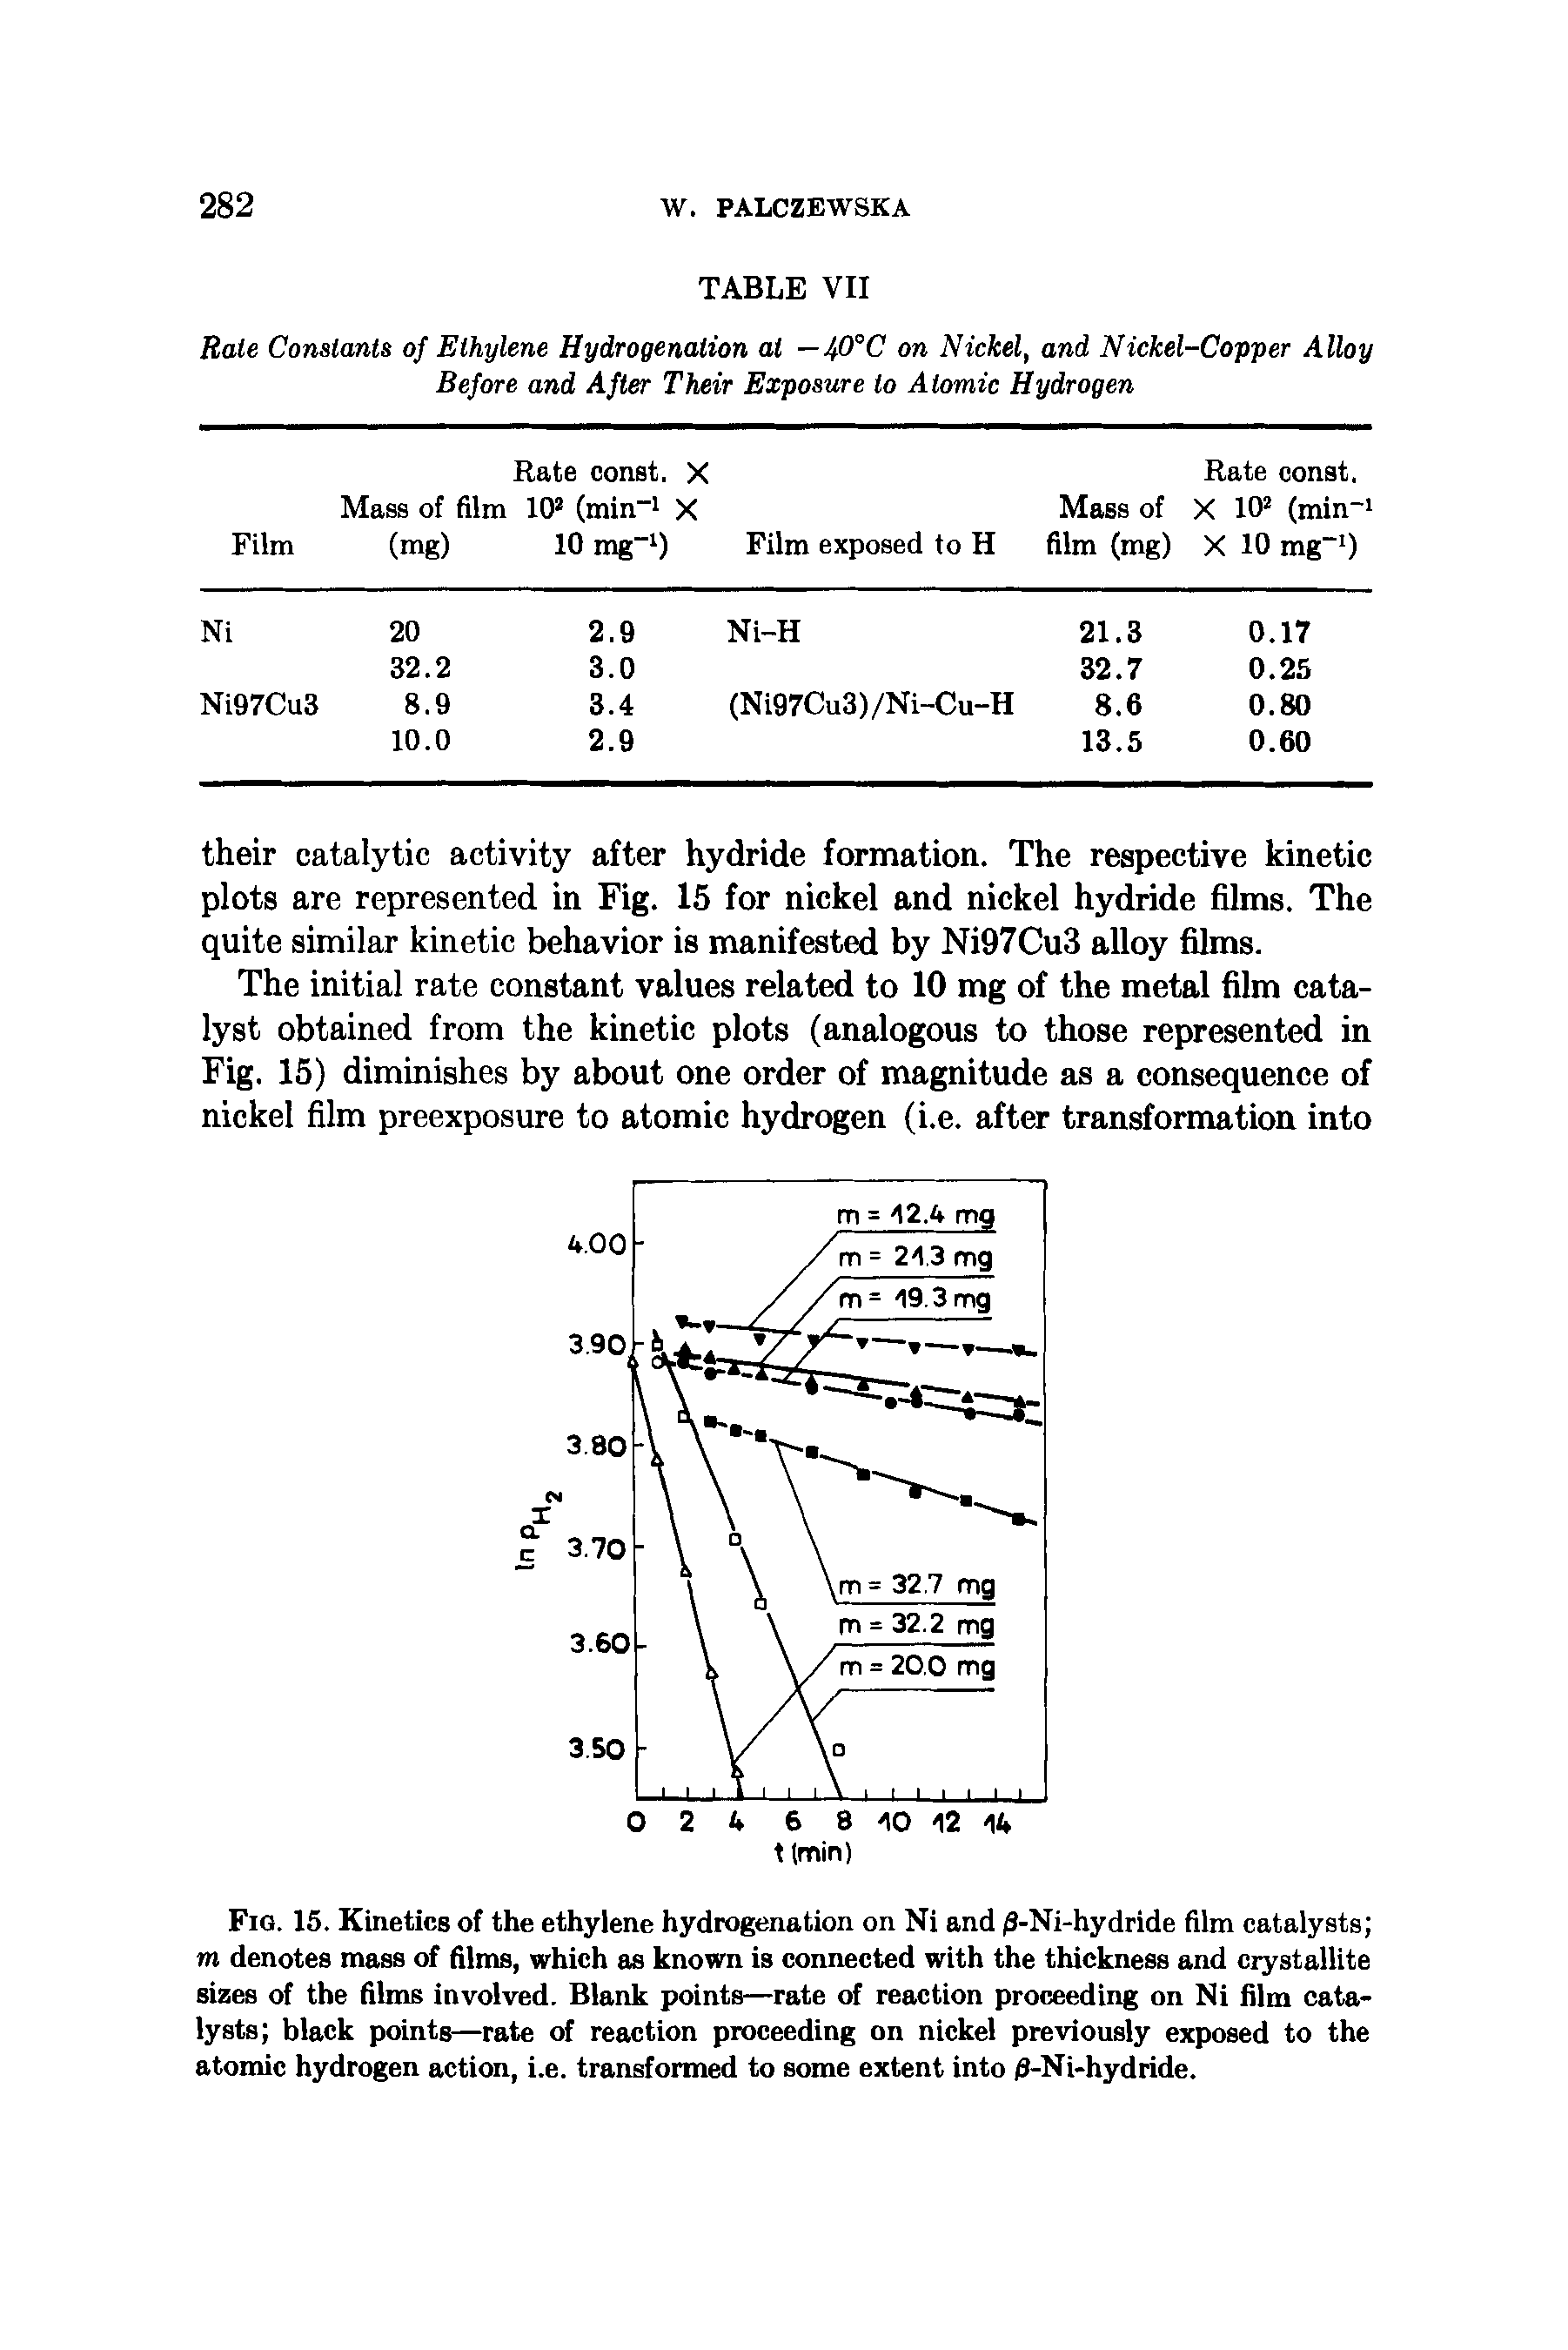 Fig. 15. Kinetics of the ethylene hydrogenation on Ni and 0-Ni-hydride film catalysts m denotes mass of films, which as known is connected with the thickness and crystallite sizes of the films involved. Blank points—rate of reaction proceeding on Ni film catalysts black points—rate of reaction proceeding on nickel previously exposed to the atomic hydrogen action, i.e. transformed to some extent into /3-Ni-hydride.